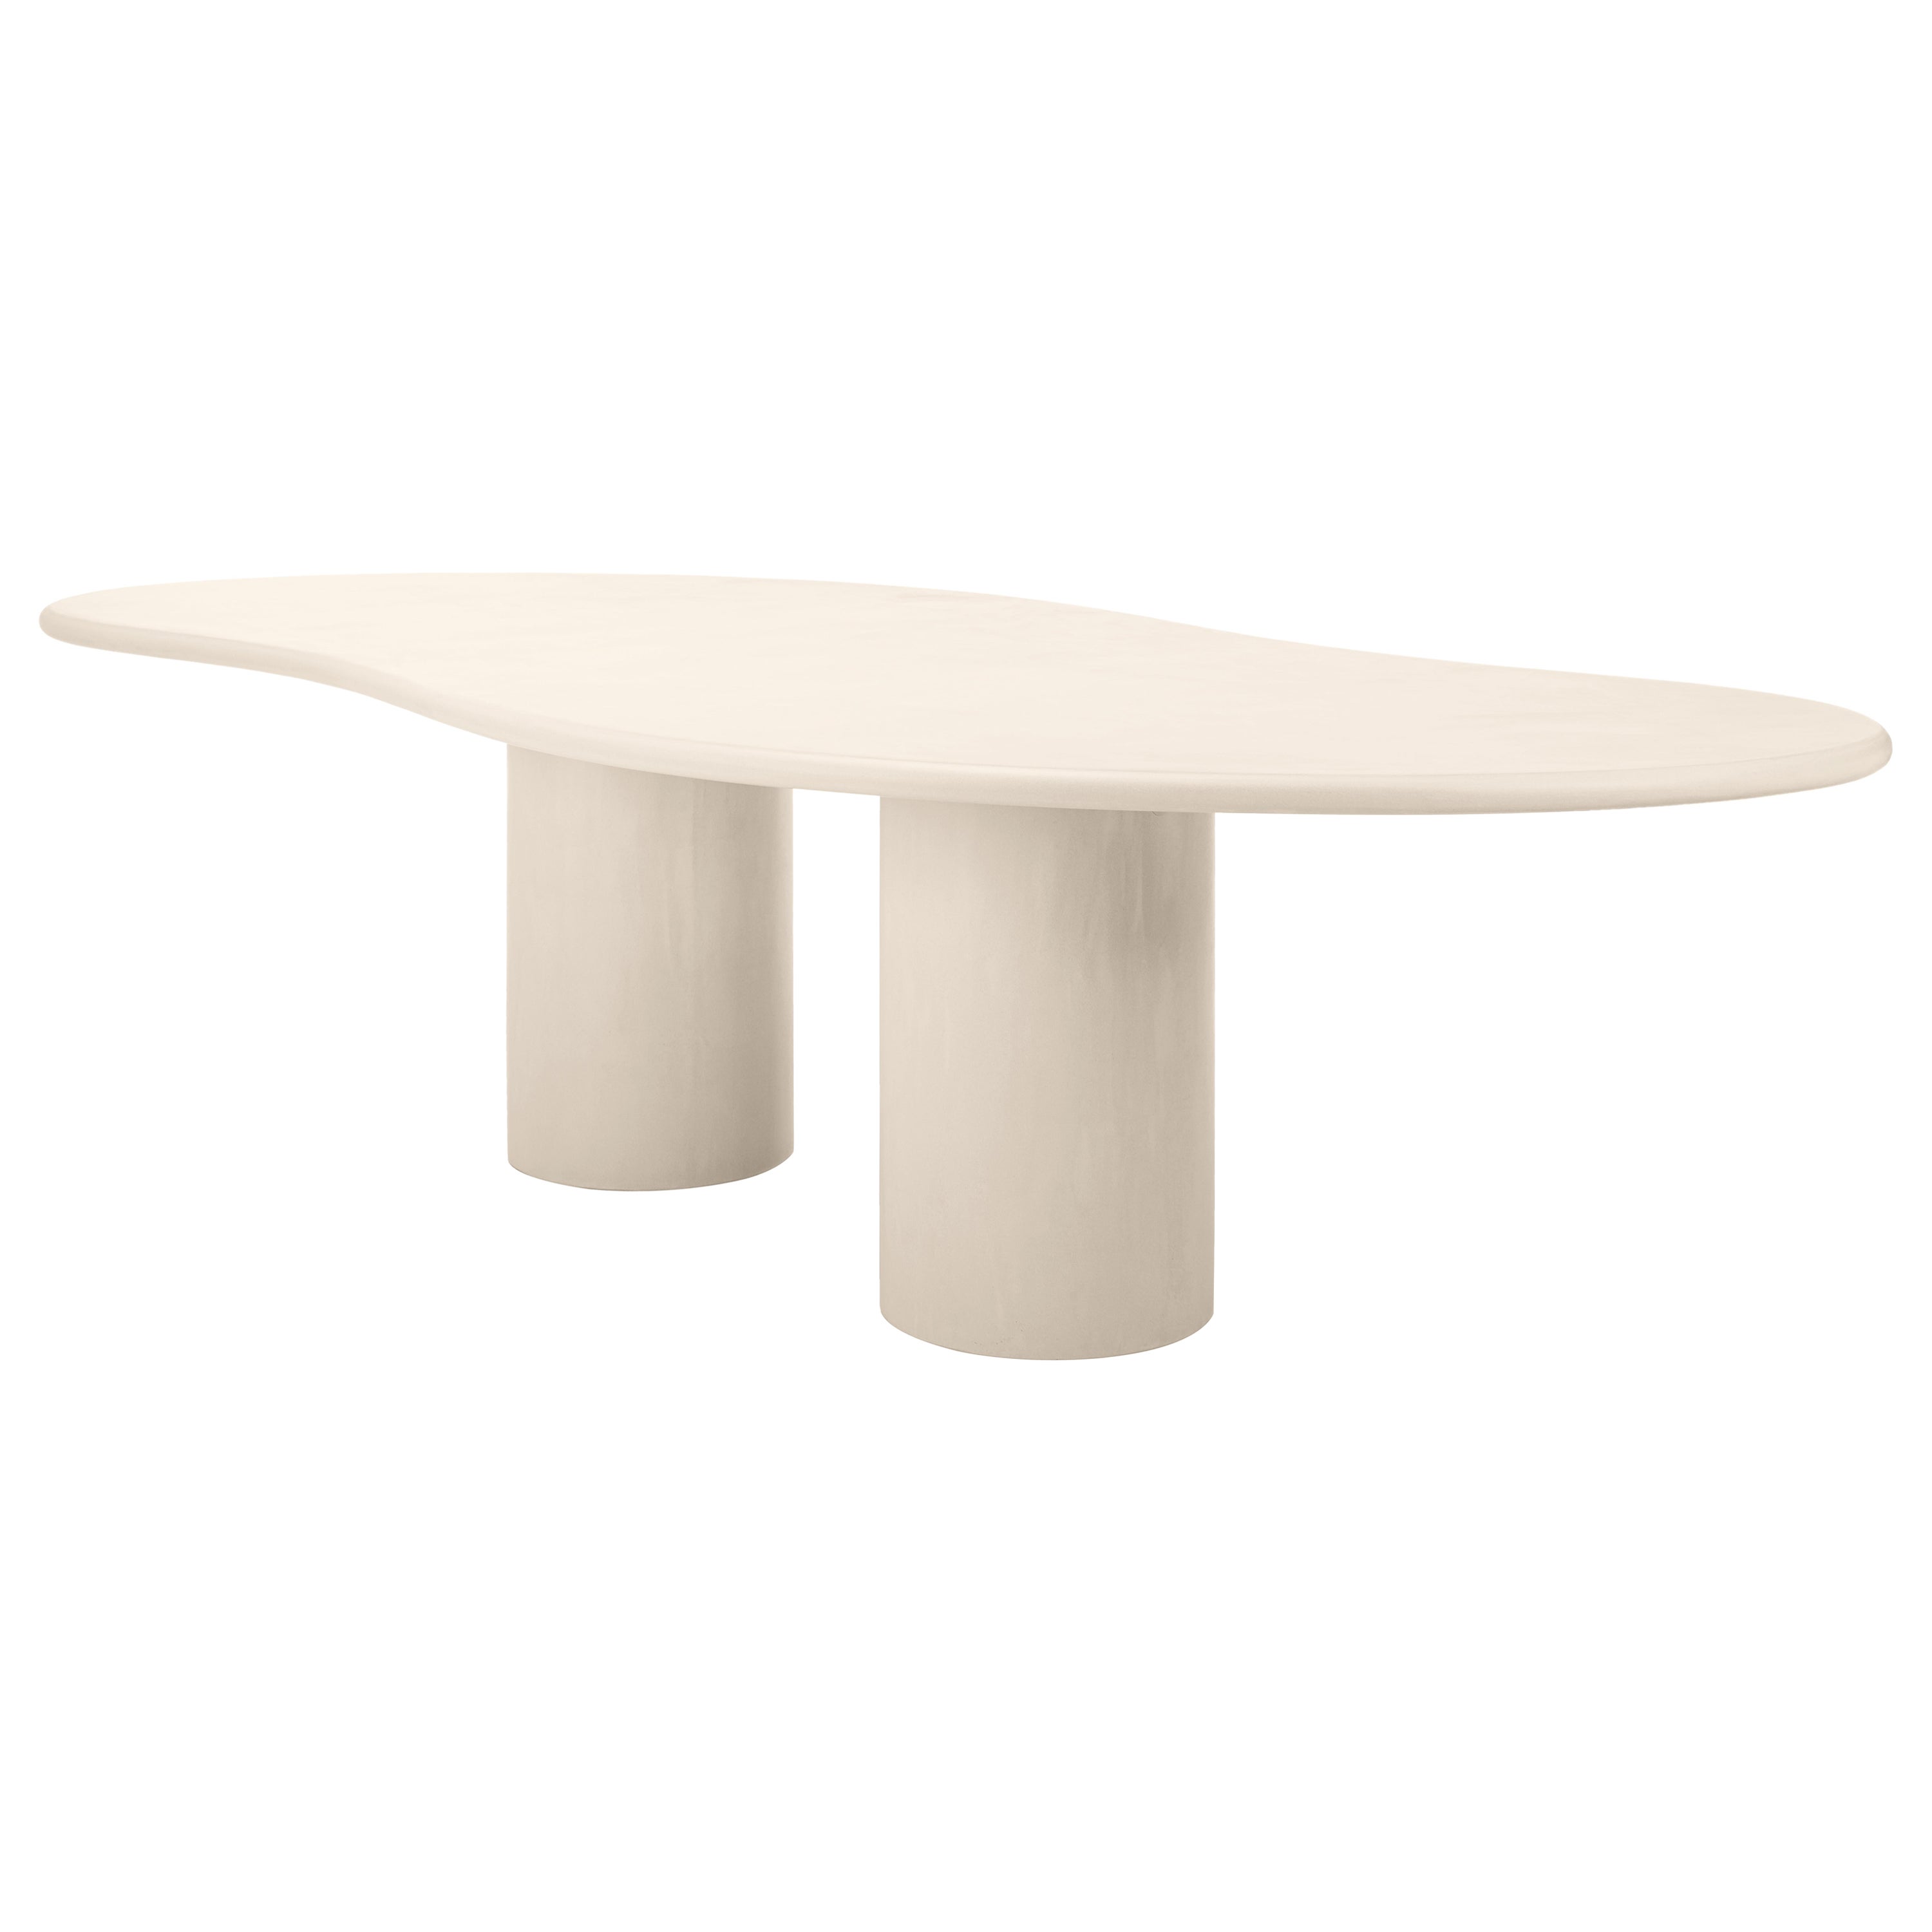 Contemporary Organic Natural Plaster "Latus" Table 260cm by Isabelle Beaumont